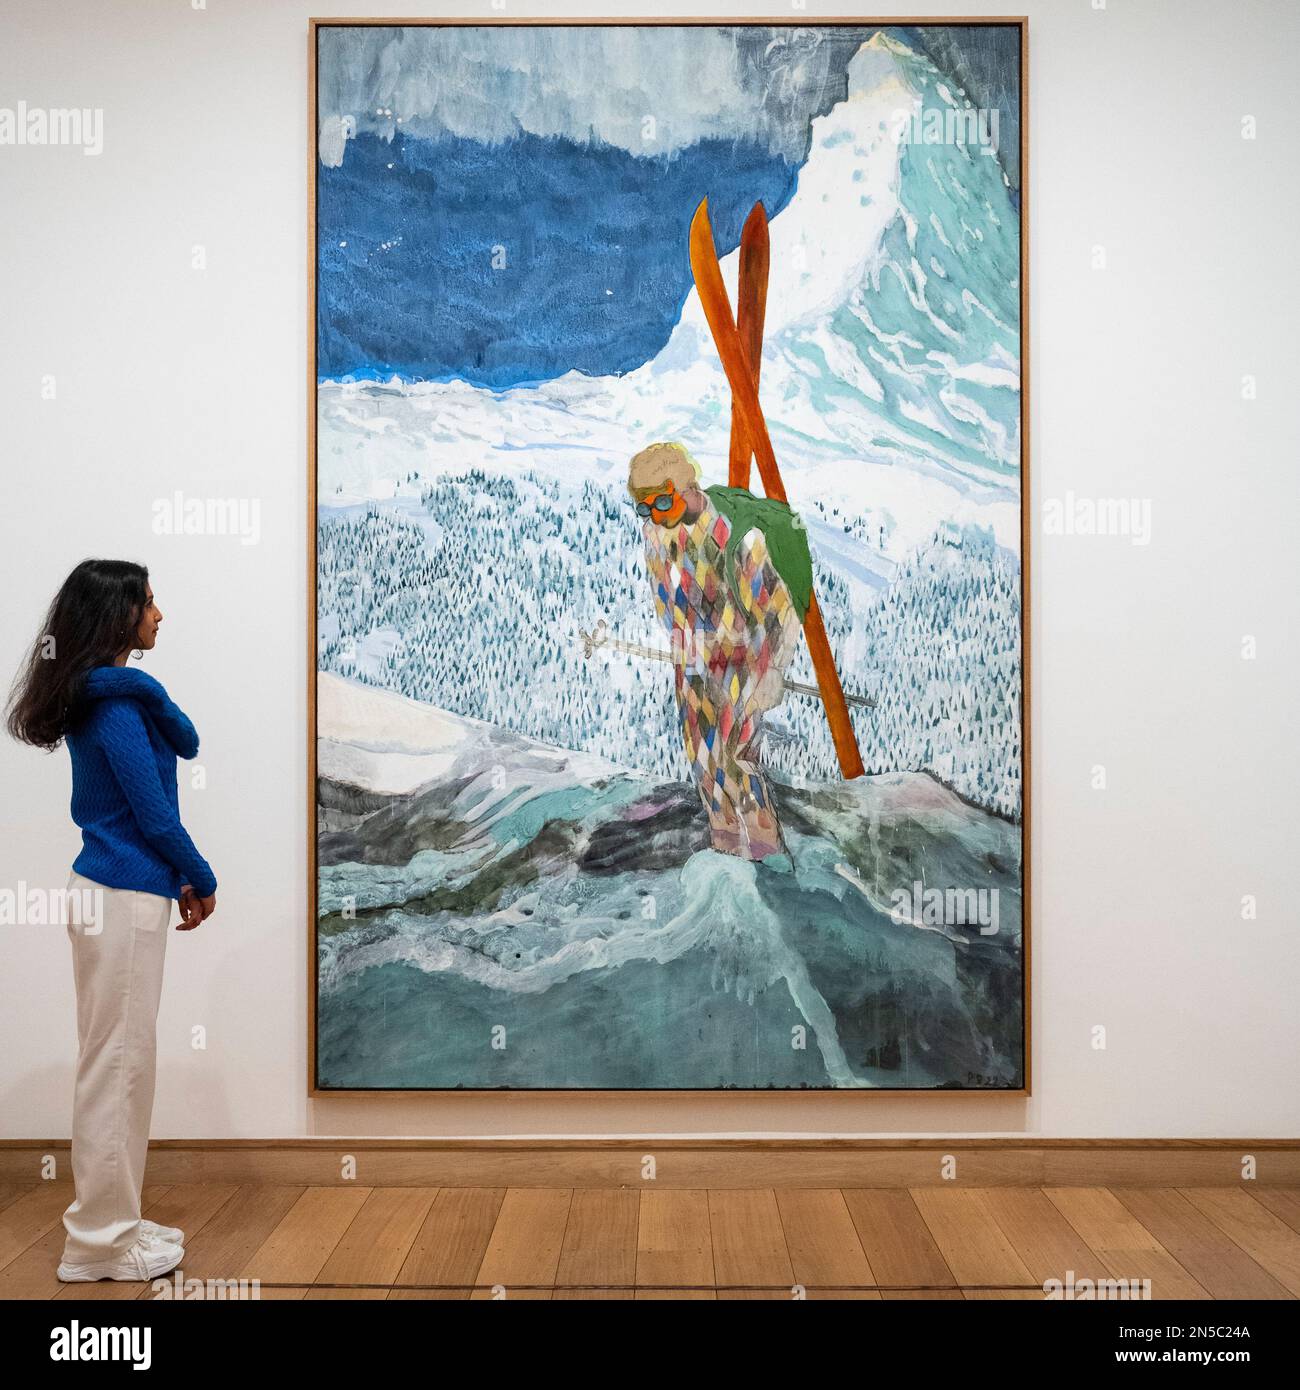 https://c8.alamy.com/comp/2N5C24A/london-uk-9-february-2023-a-staff-member-views-alpinist-2019-22-by-peter-doig-at-a-preview-at-the-courtauld-gallery-of-the-morgan-stanley-exhibition-peter-doig-presenting-new-and-recent-works-by-peter-doig-including-paintings-created-since-the-artists-move-from-trinidad-to-london-in-2021-the-exhibition-runs-10-february-to-29-may-2023-credit-stephen-chung-alamy-live-news-2N5C24A.jpg